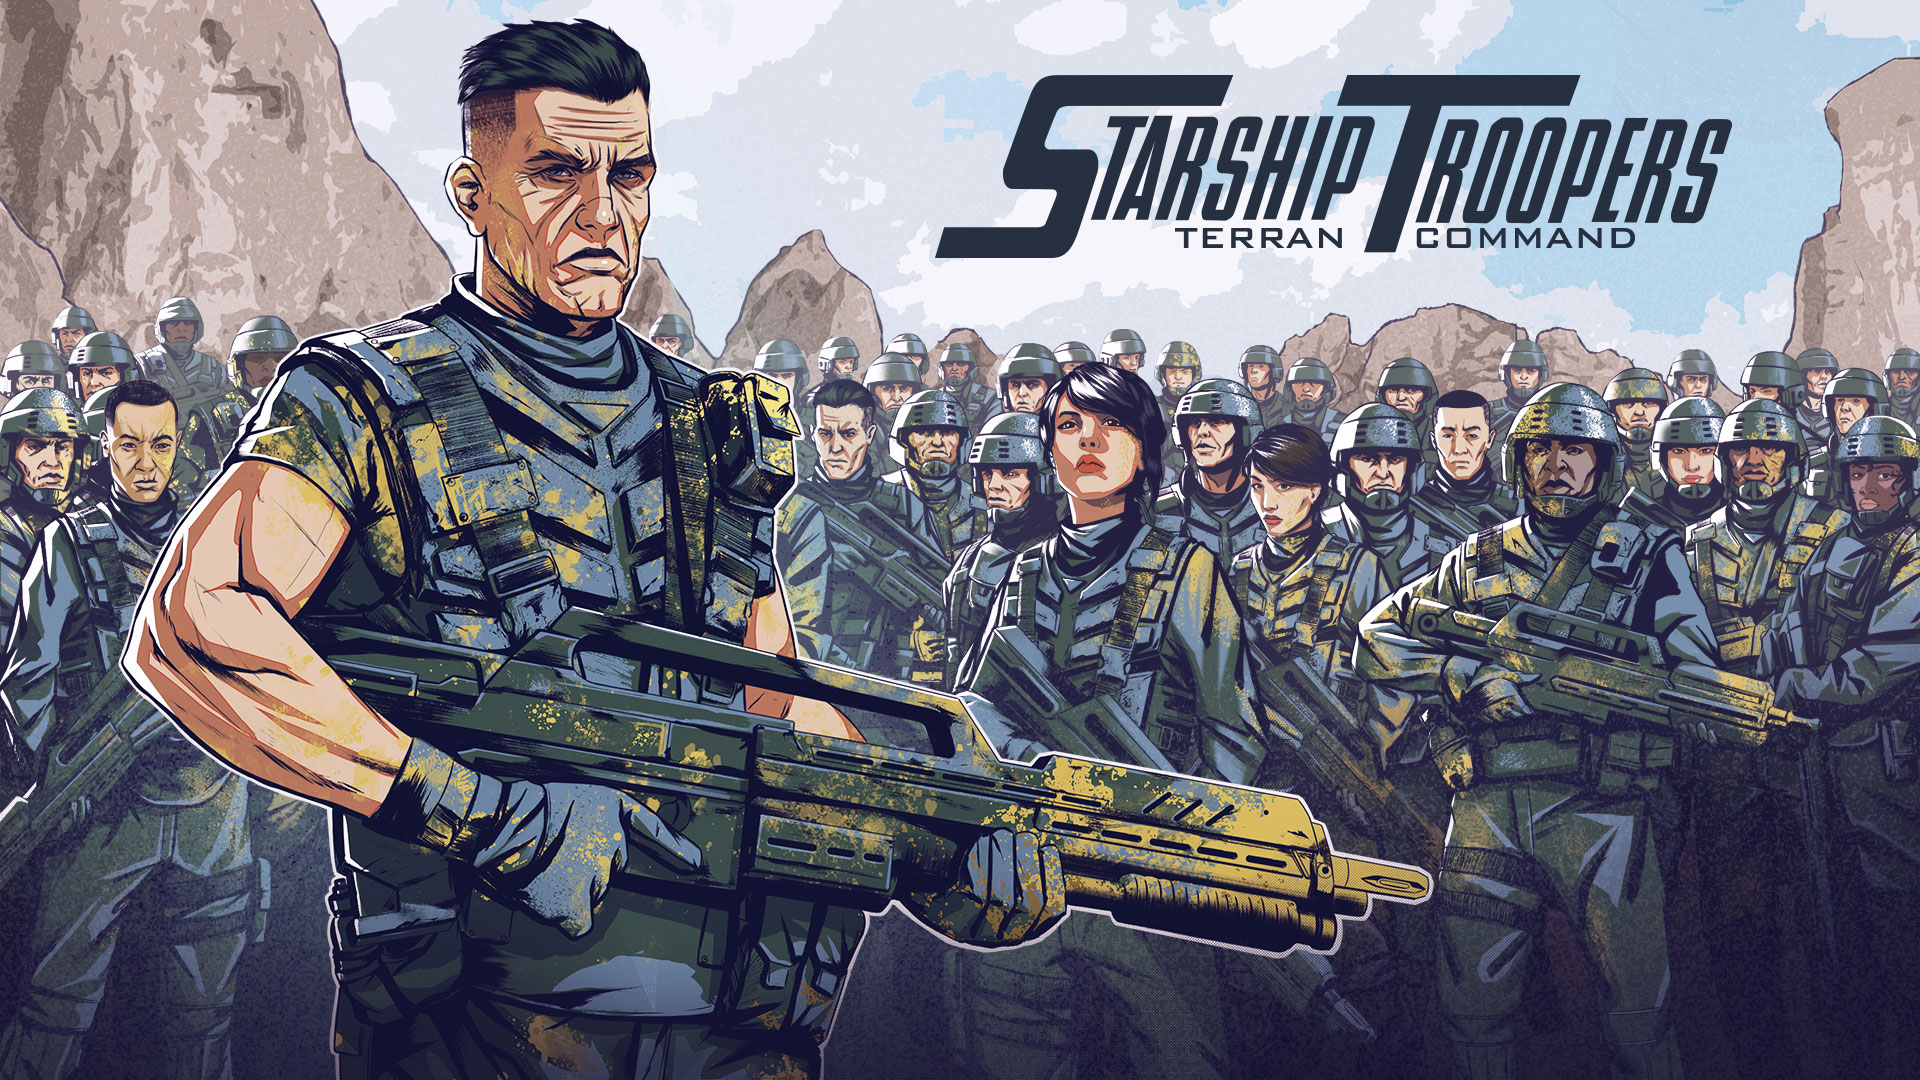 Starship Troopers Terran Command by Slitherine Games Have You Played